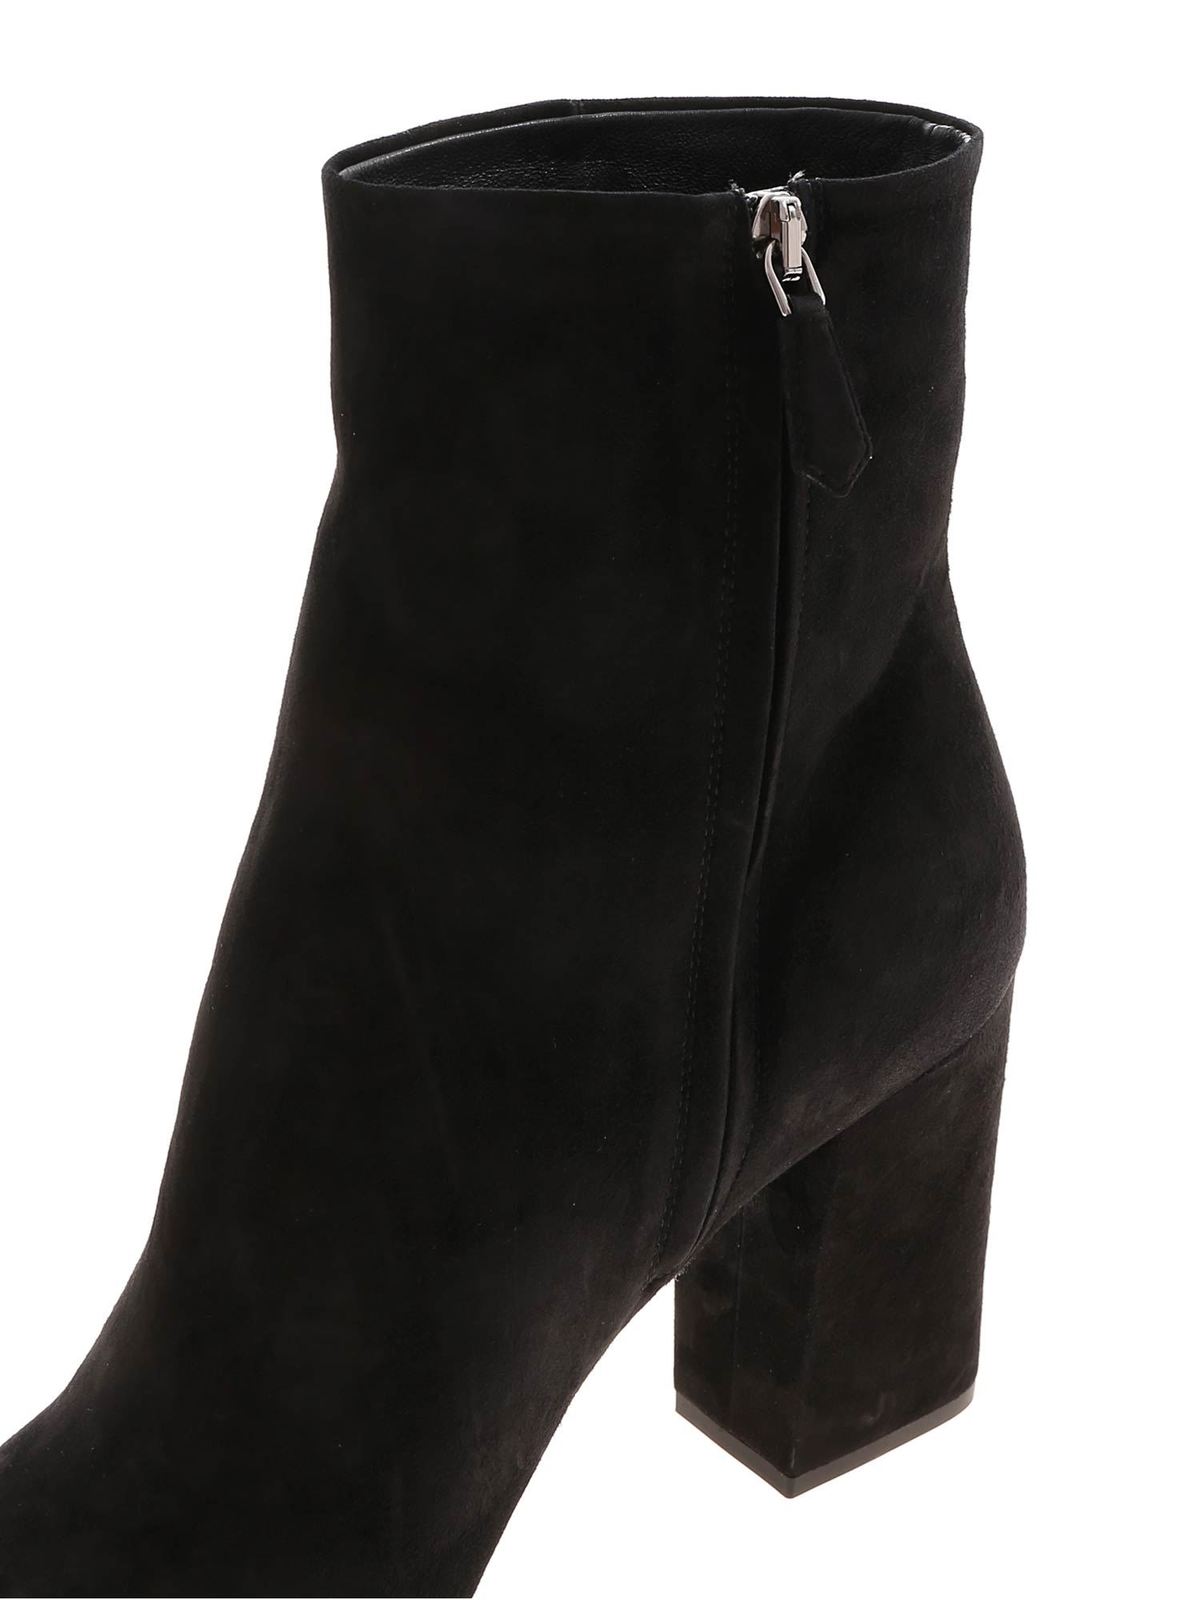 Prada - Suede ankle boots in black 